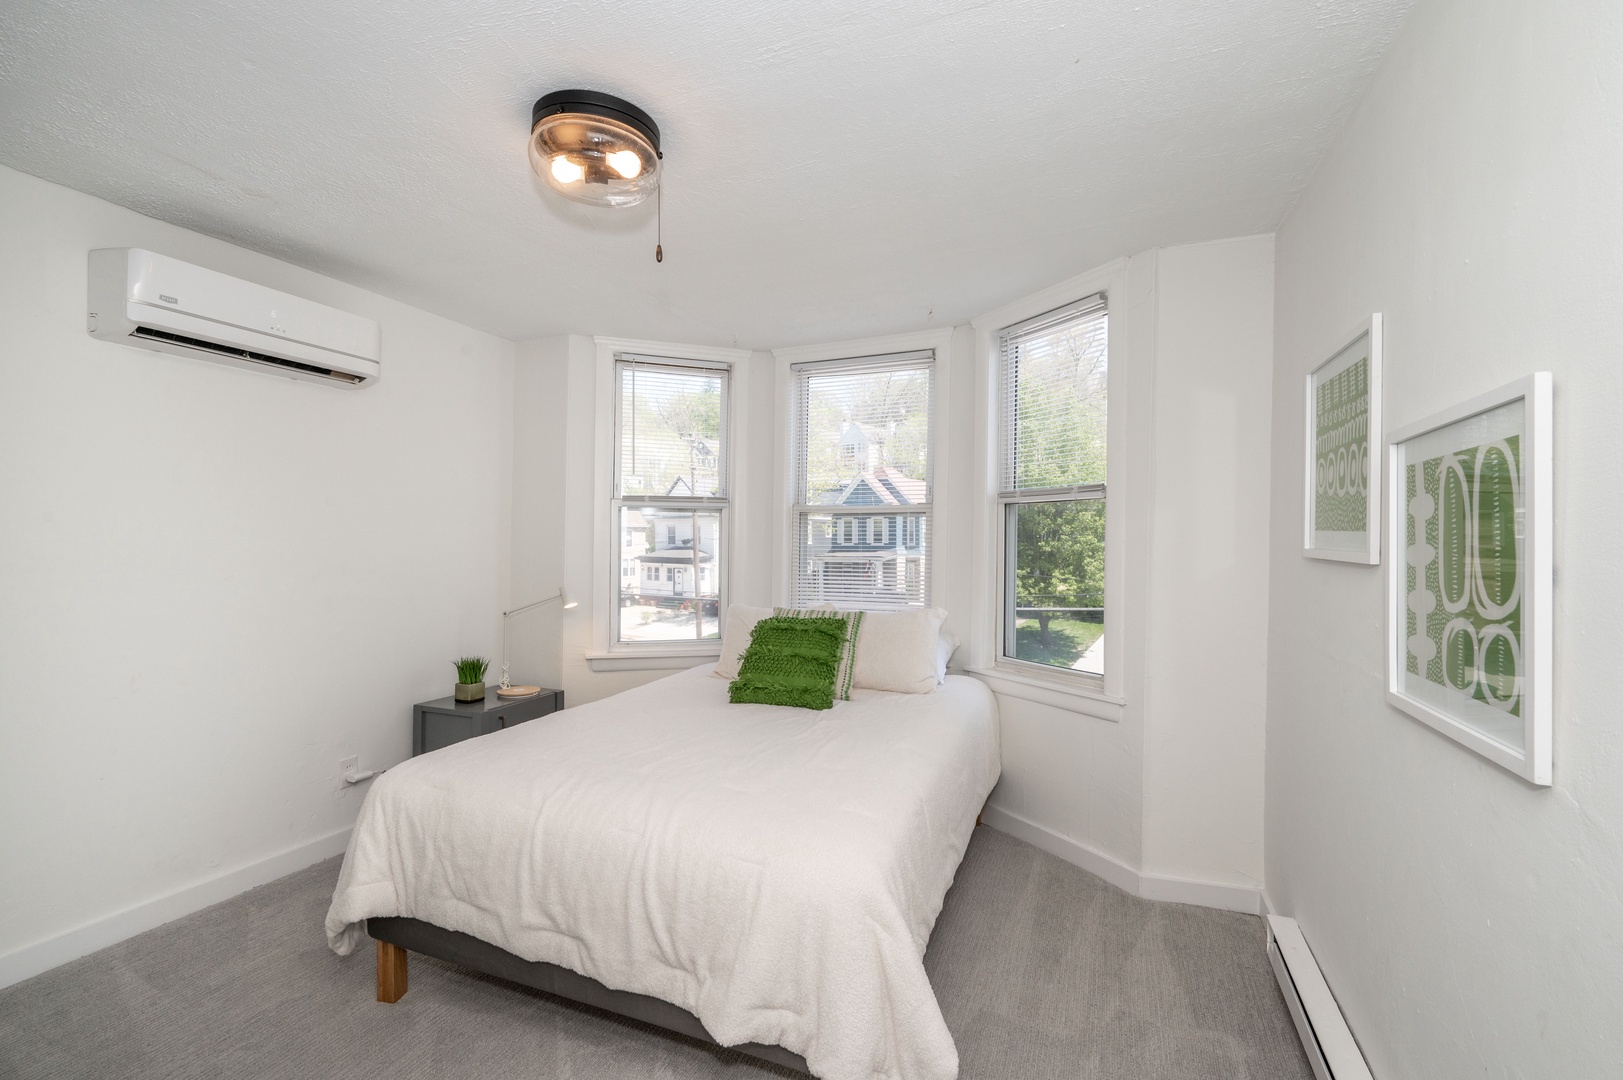 Apt 2 – The 1st of 2 queen bedrooms, with beautiful windows & closet space